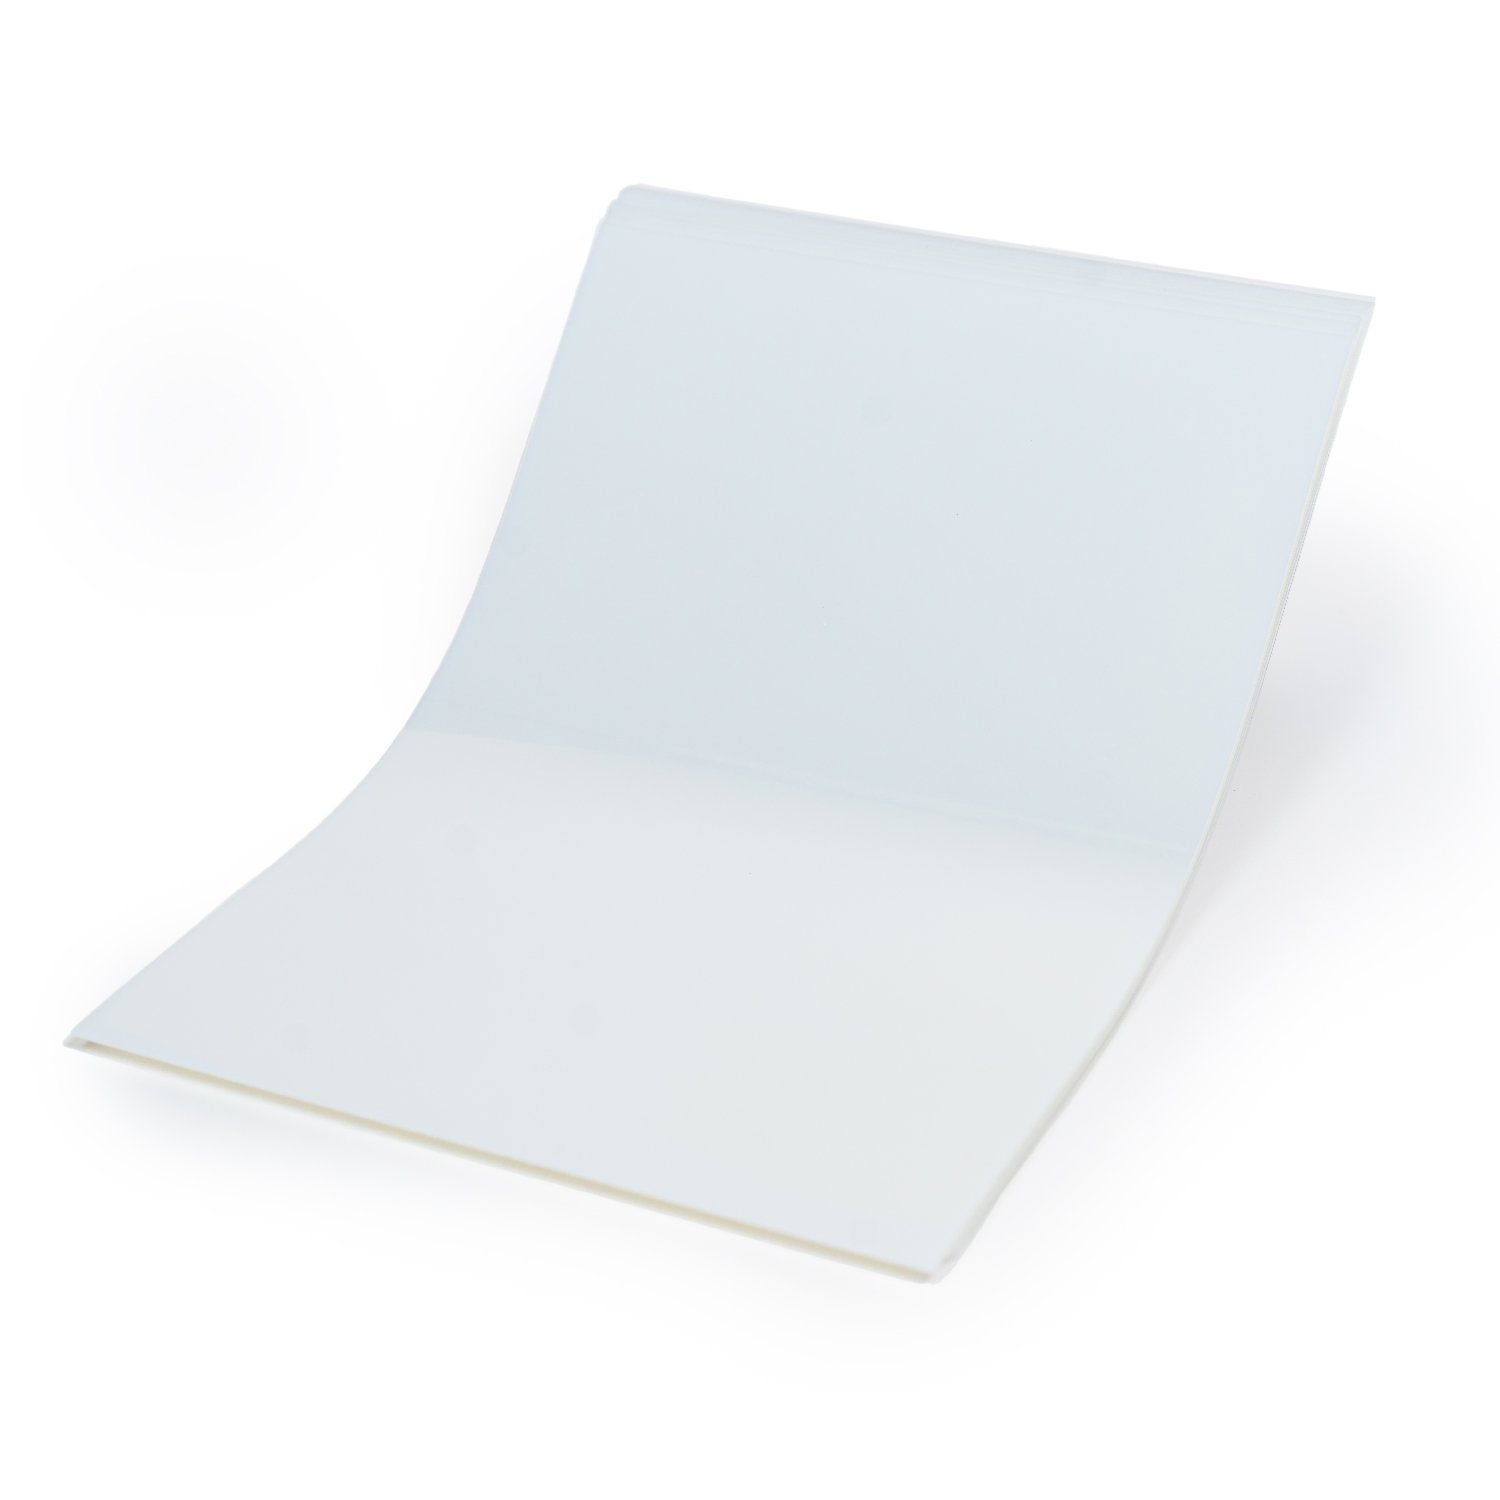 Transparency Film For Inkjet Printers - Pack of 100 Sheets (A3